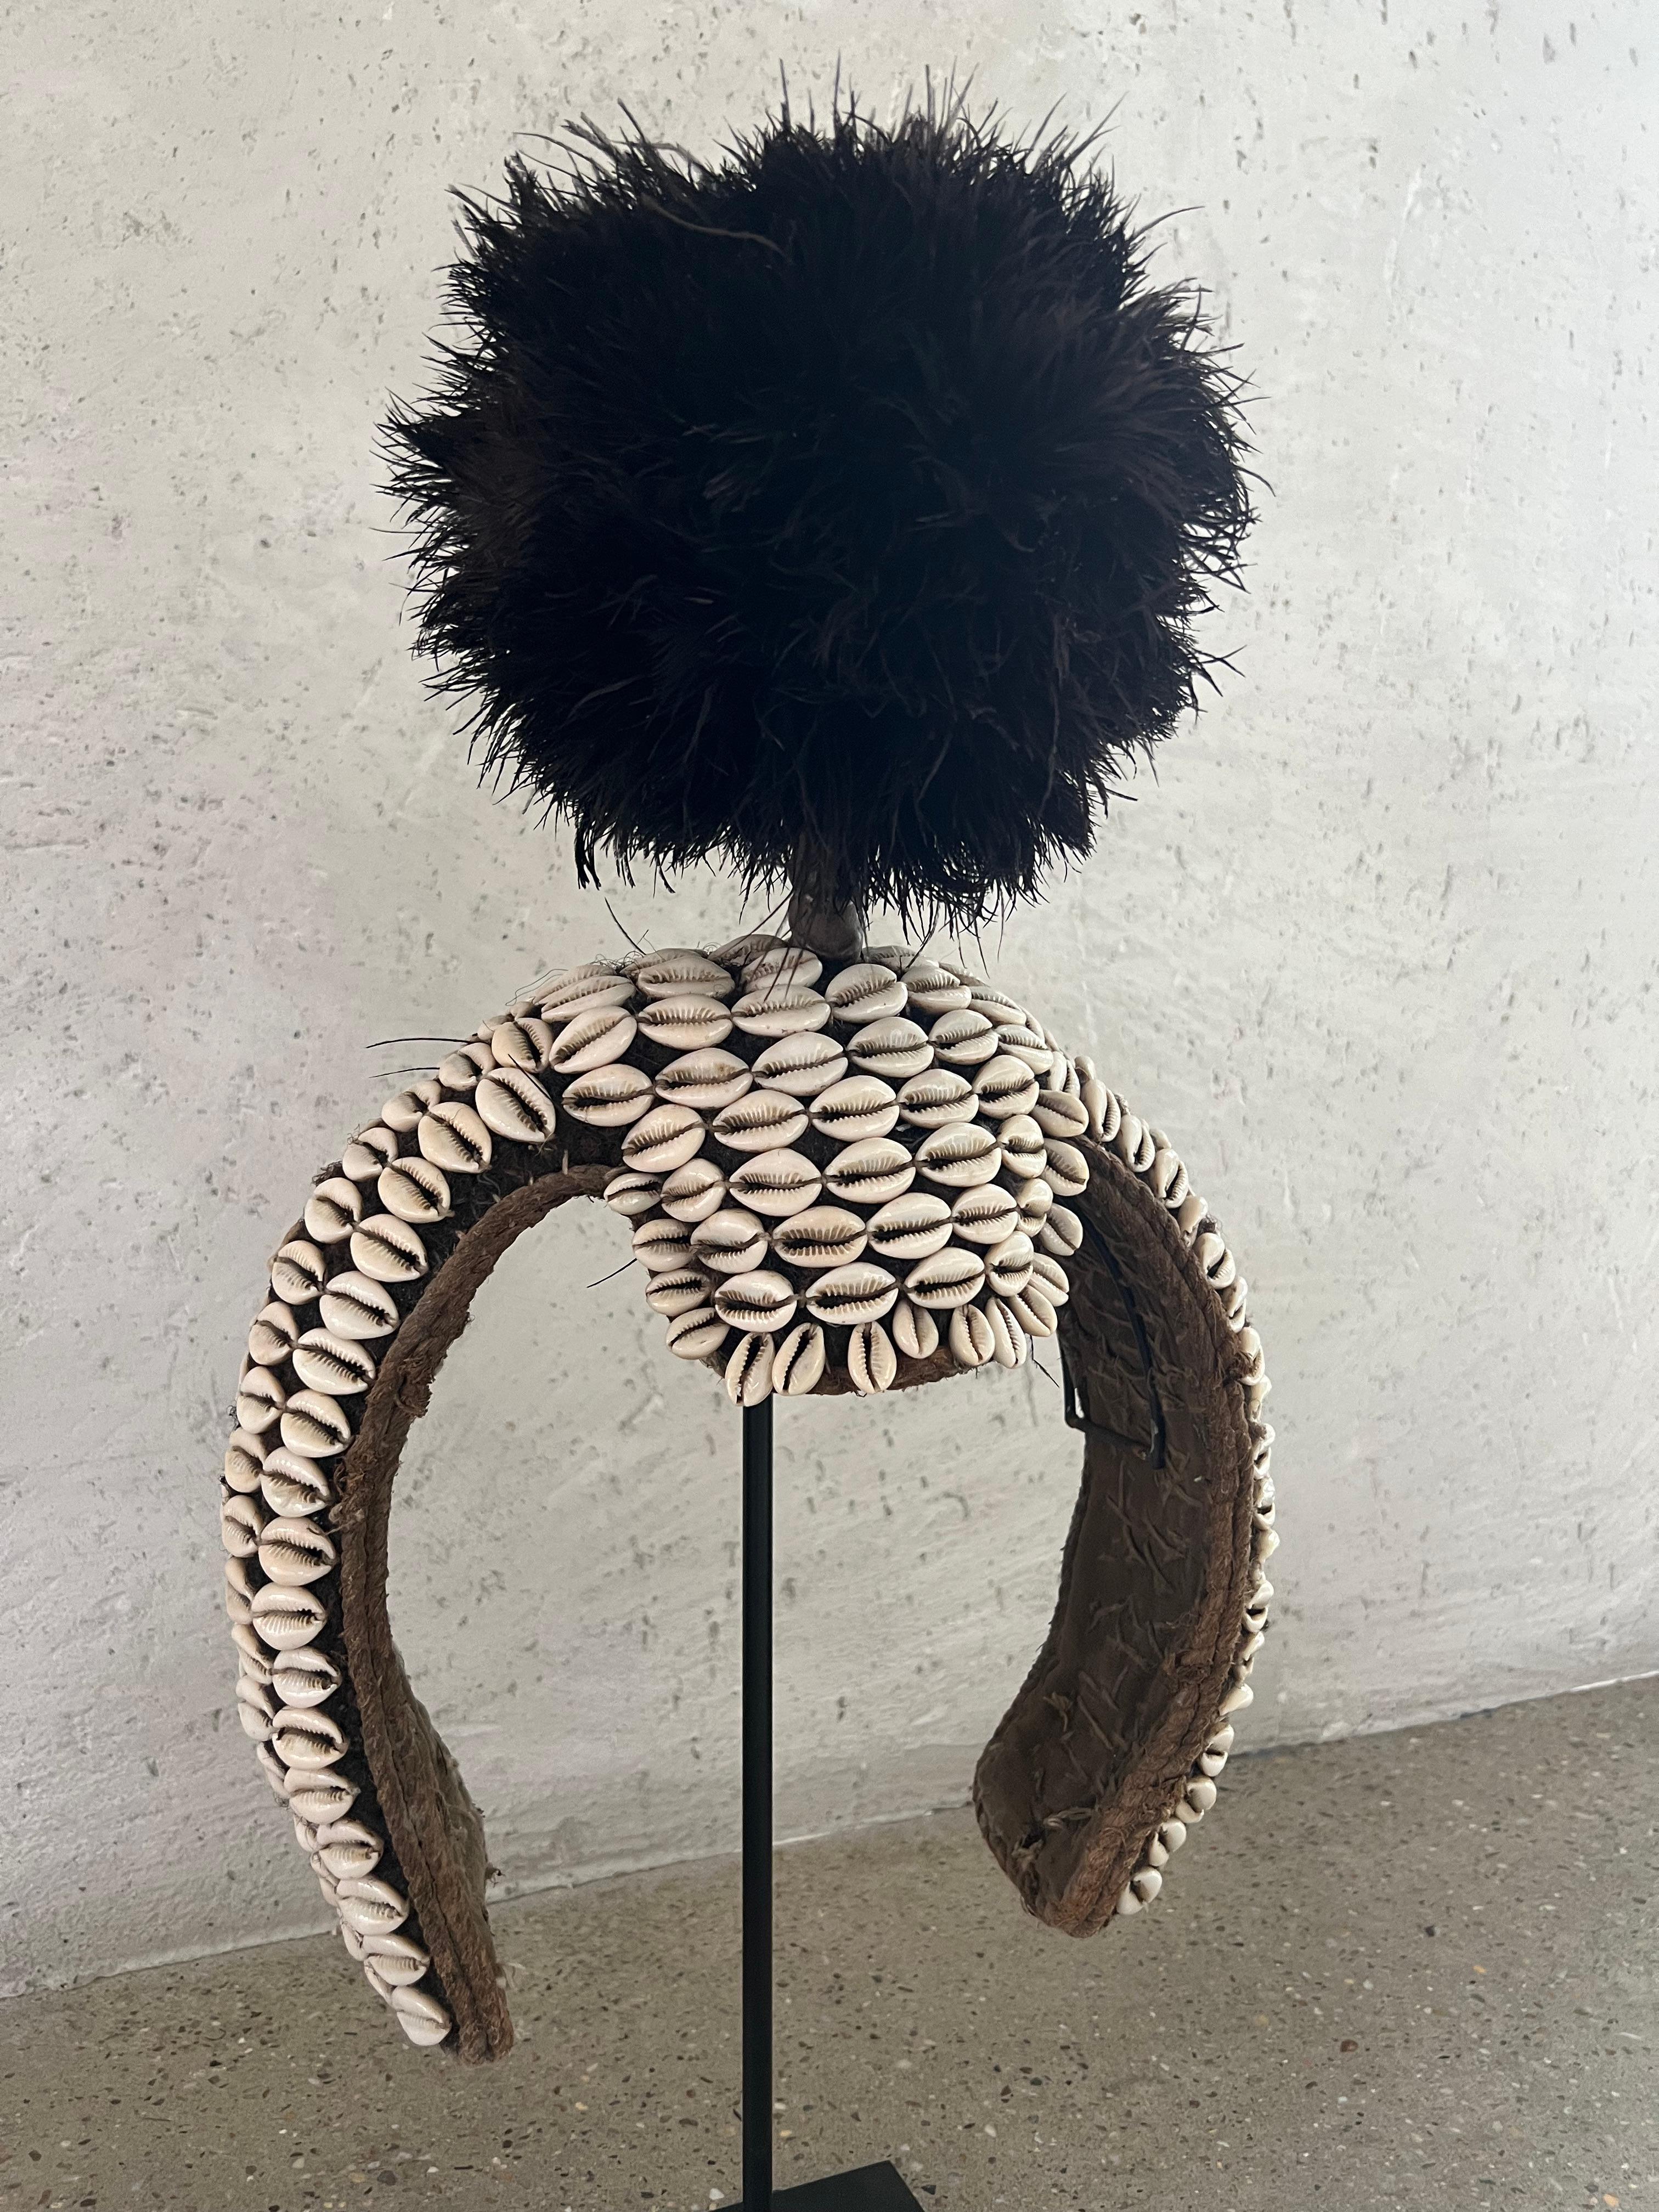 Bamileke headdress, originating from the Bamileke ethnic group in Cameroon, is ceremonial and symbolic artifacts used in traditional ceremonies and rituals. It is crafted using natural materials, feathers, shells, and beads.

The headdress itself is